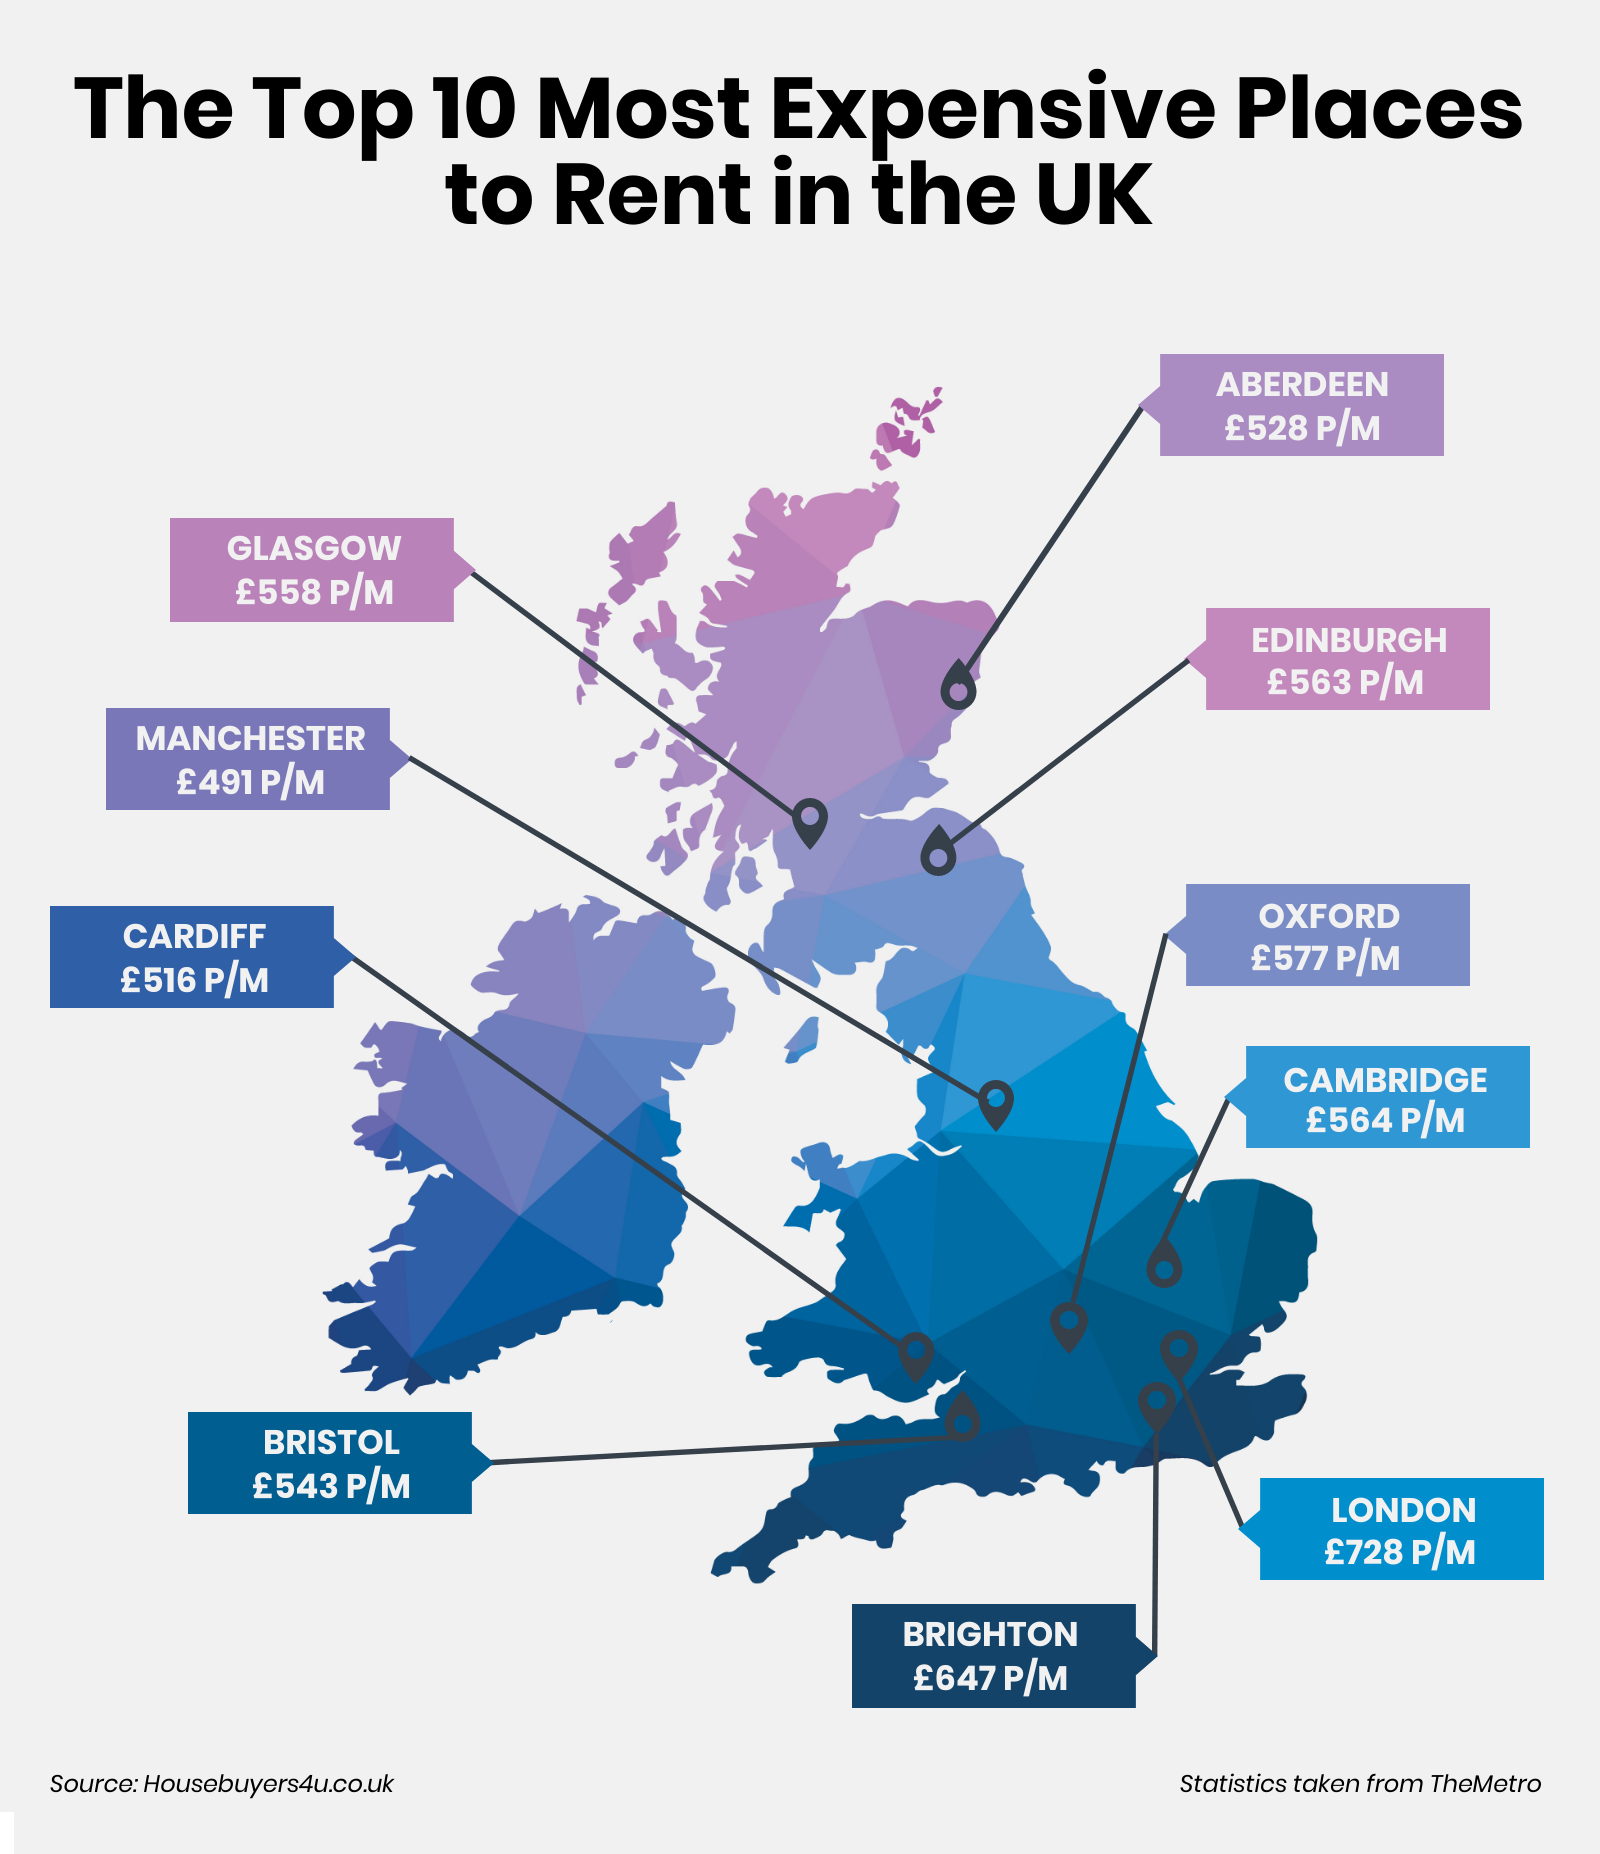 An infographic which shows the top 10 most expensive cities to rent in the UK